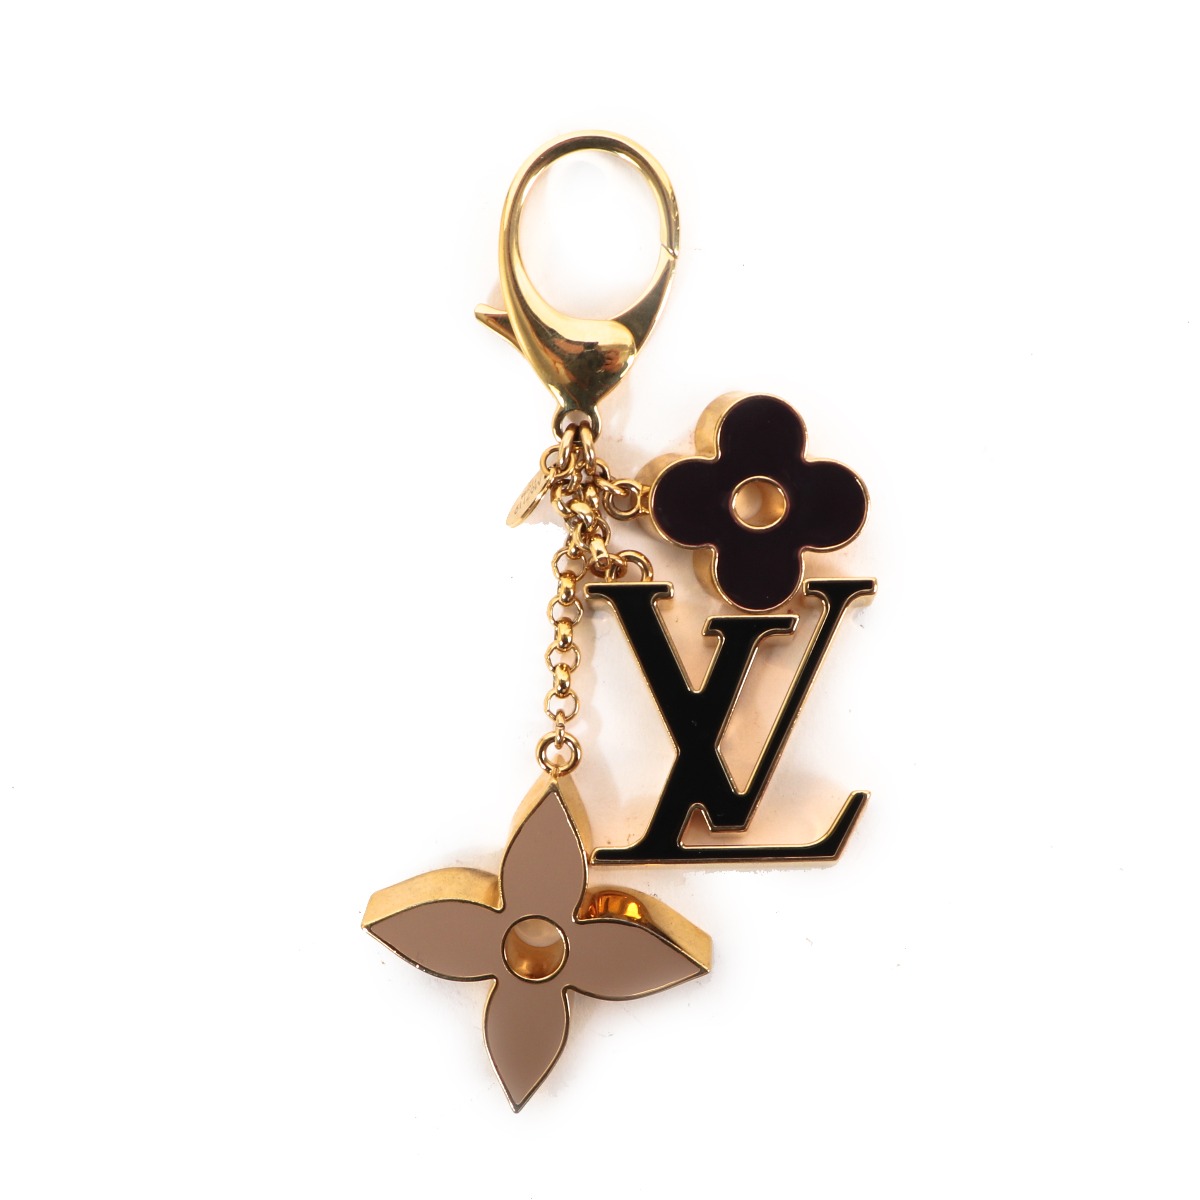 Key ring Louis Vuitton Gold in Not specified - 25256087